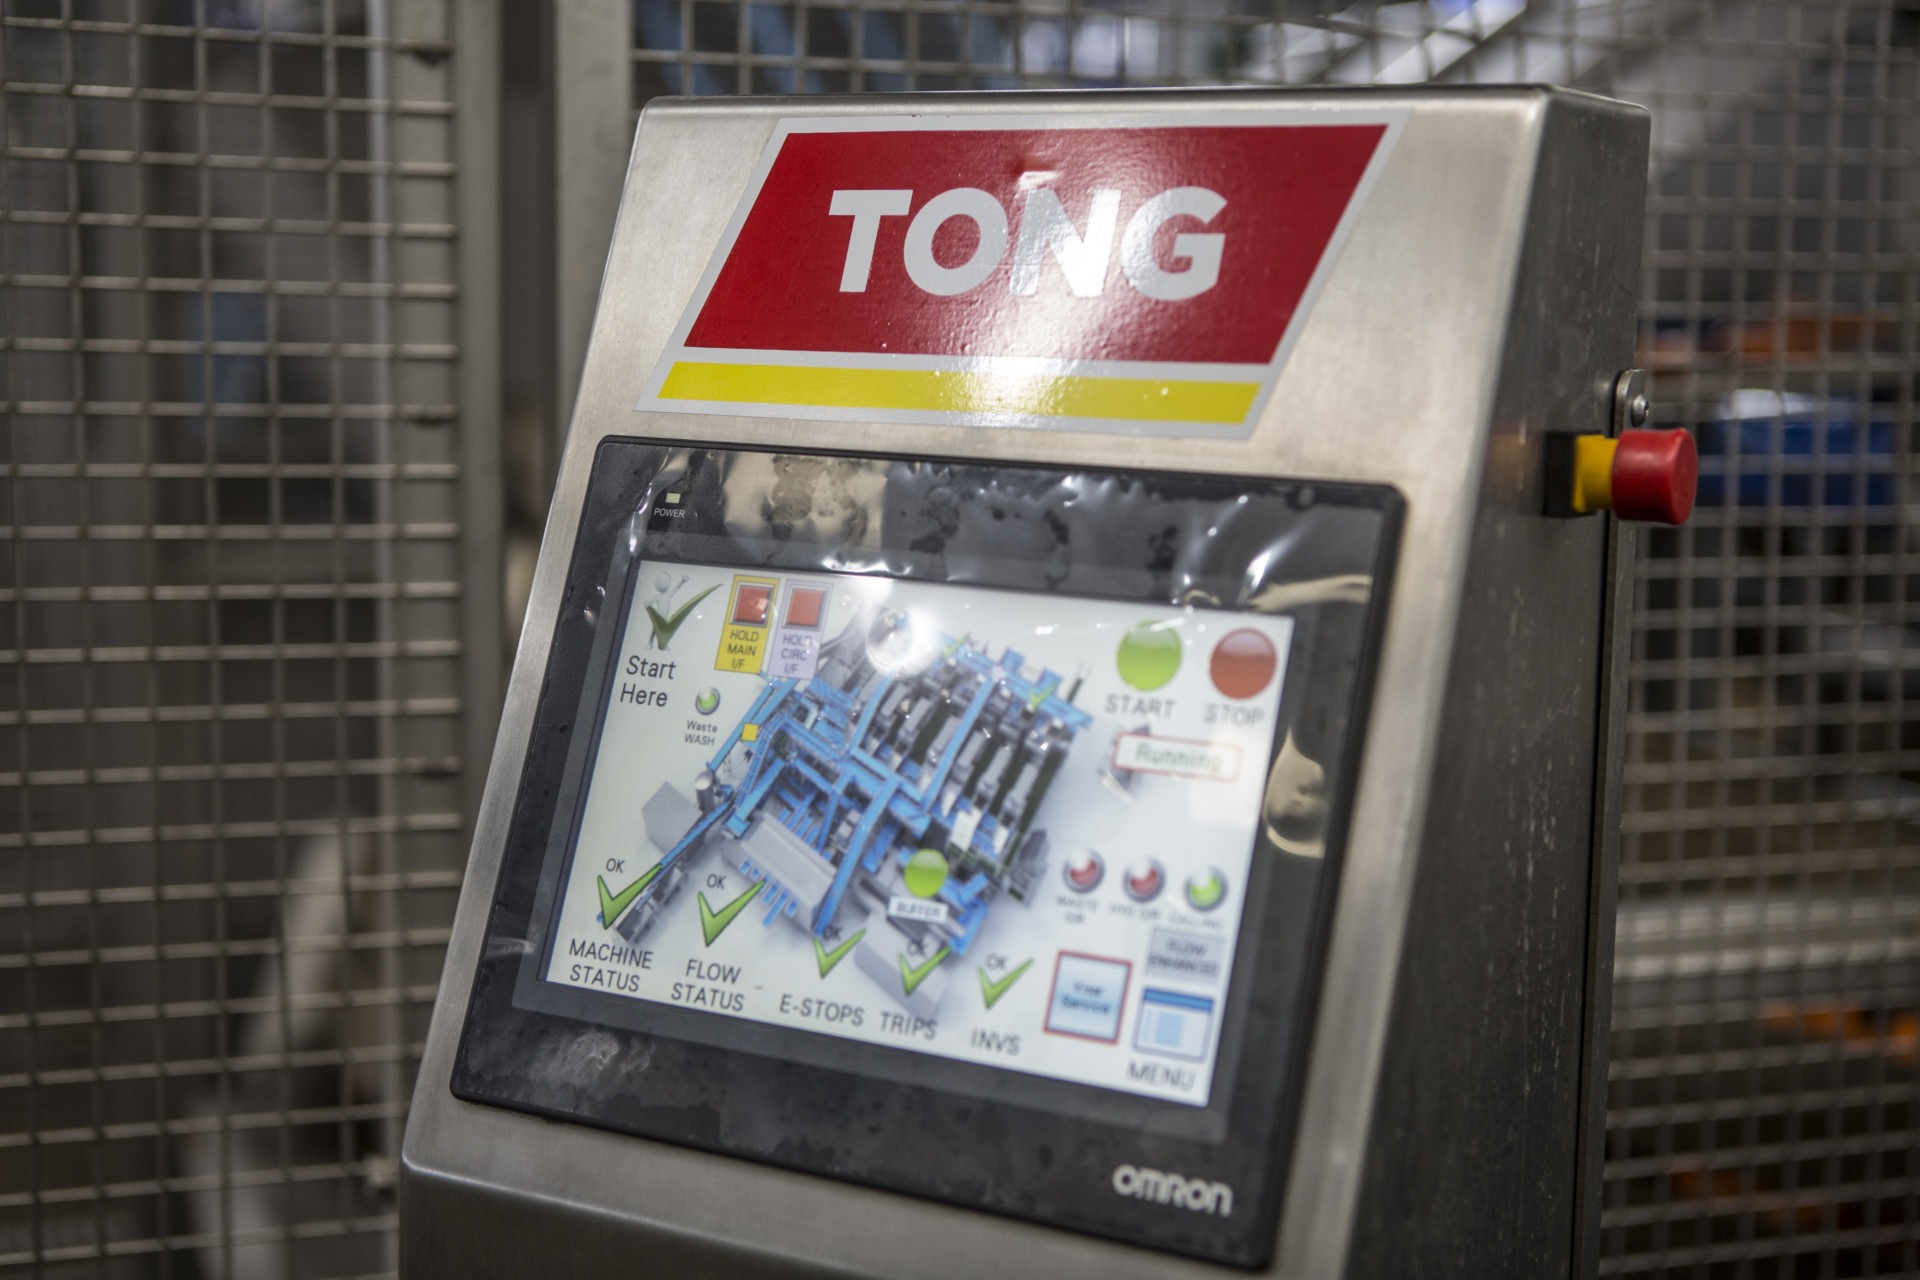 Tong Engineering HMI Touch Screen Control 1 | Tong Engineering UK